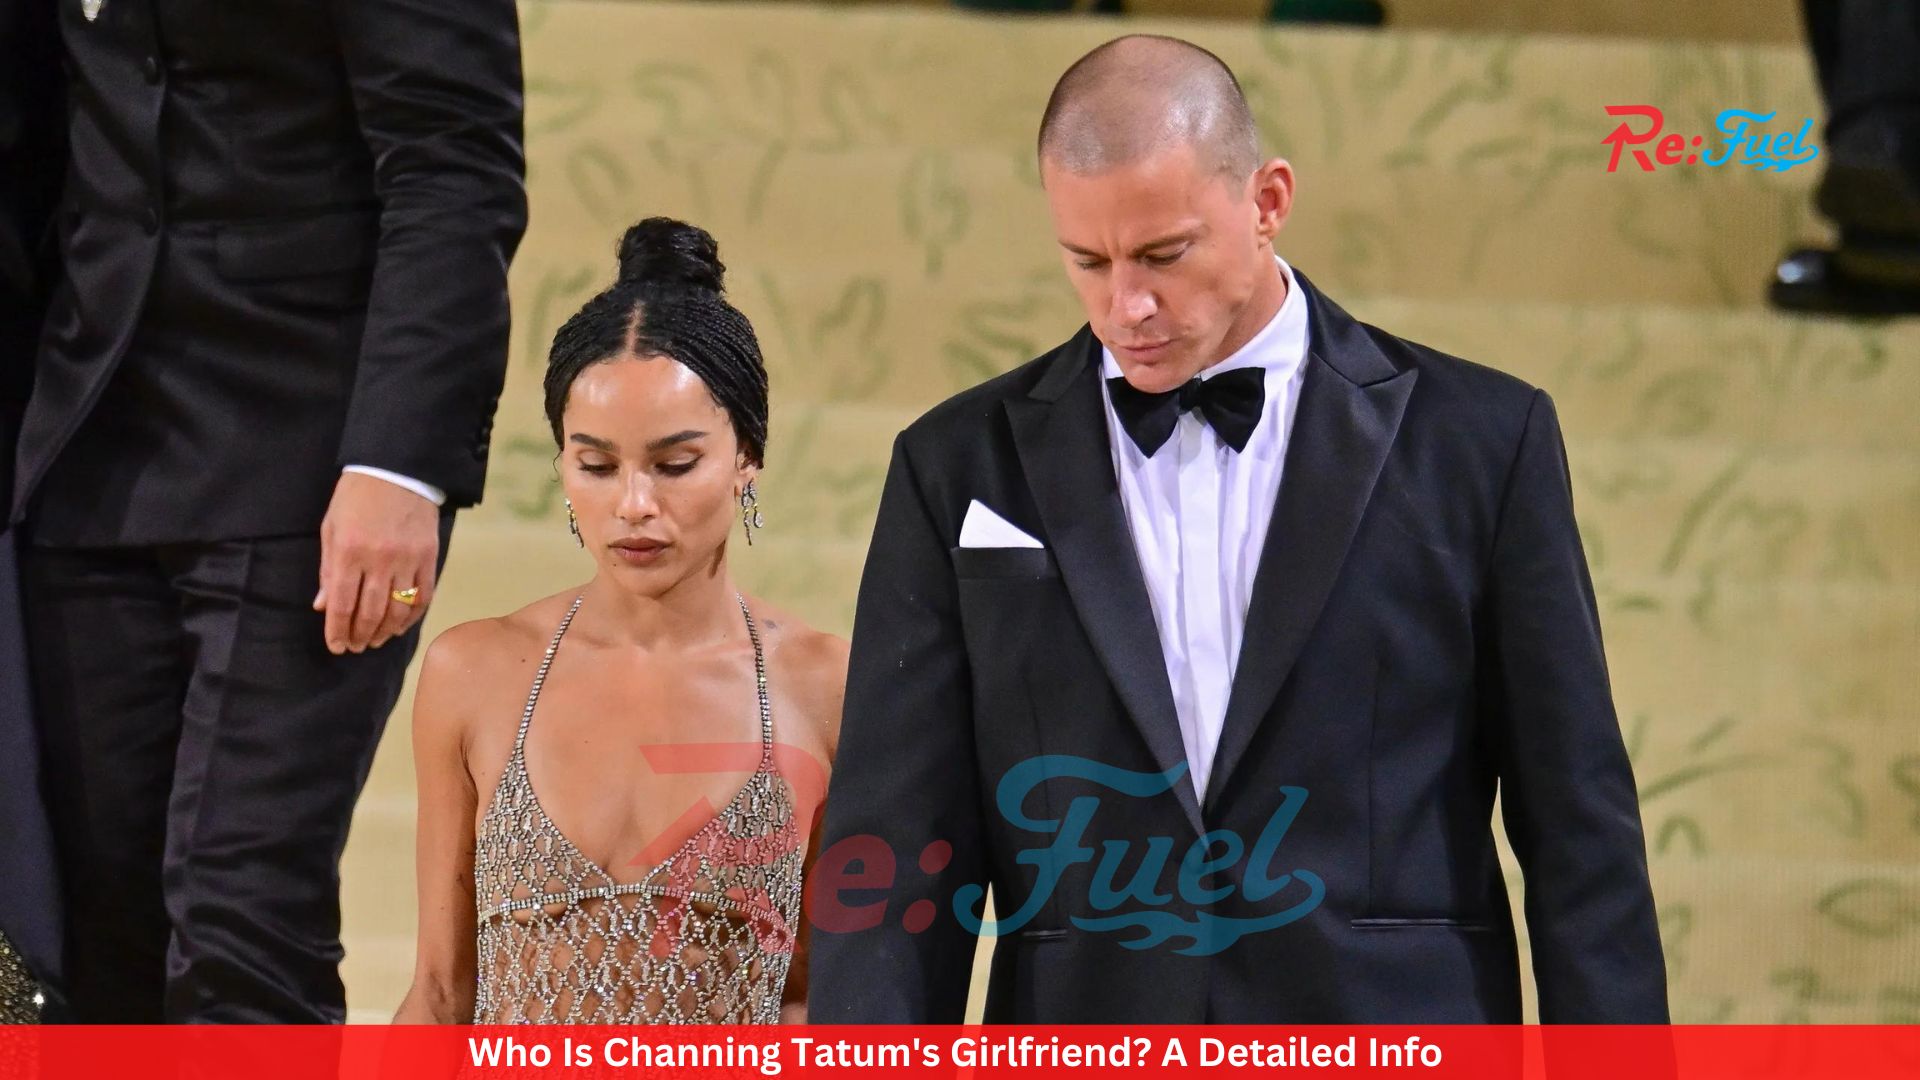 Who Is Channing Tatum's Girlfriend? A Detailed Info